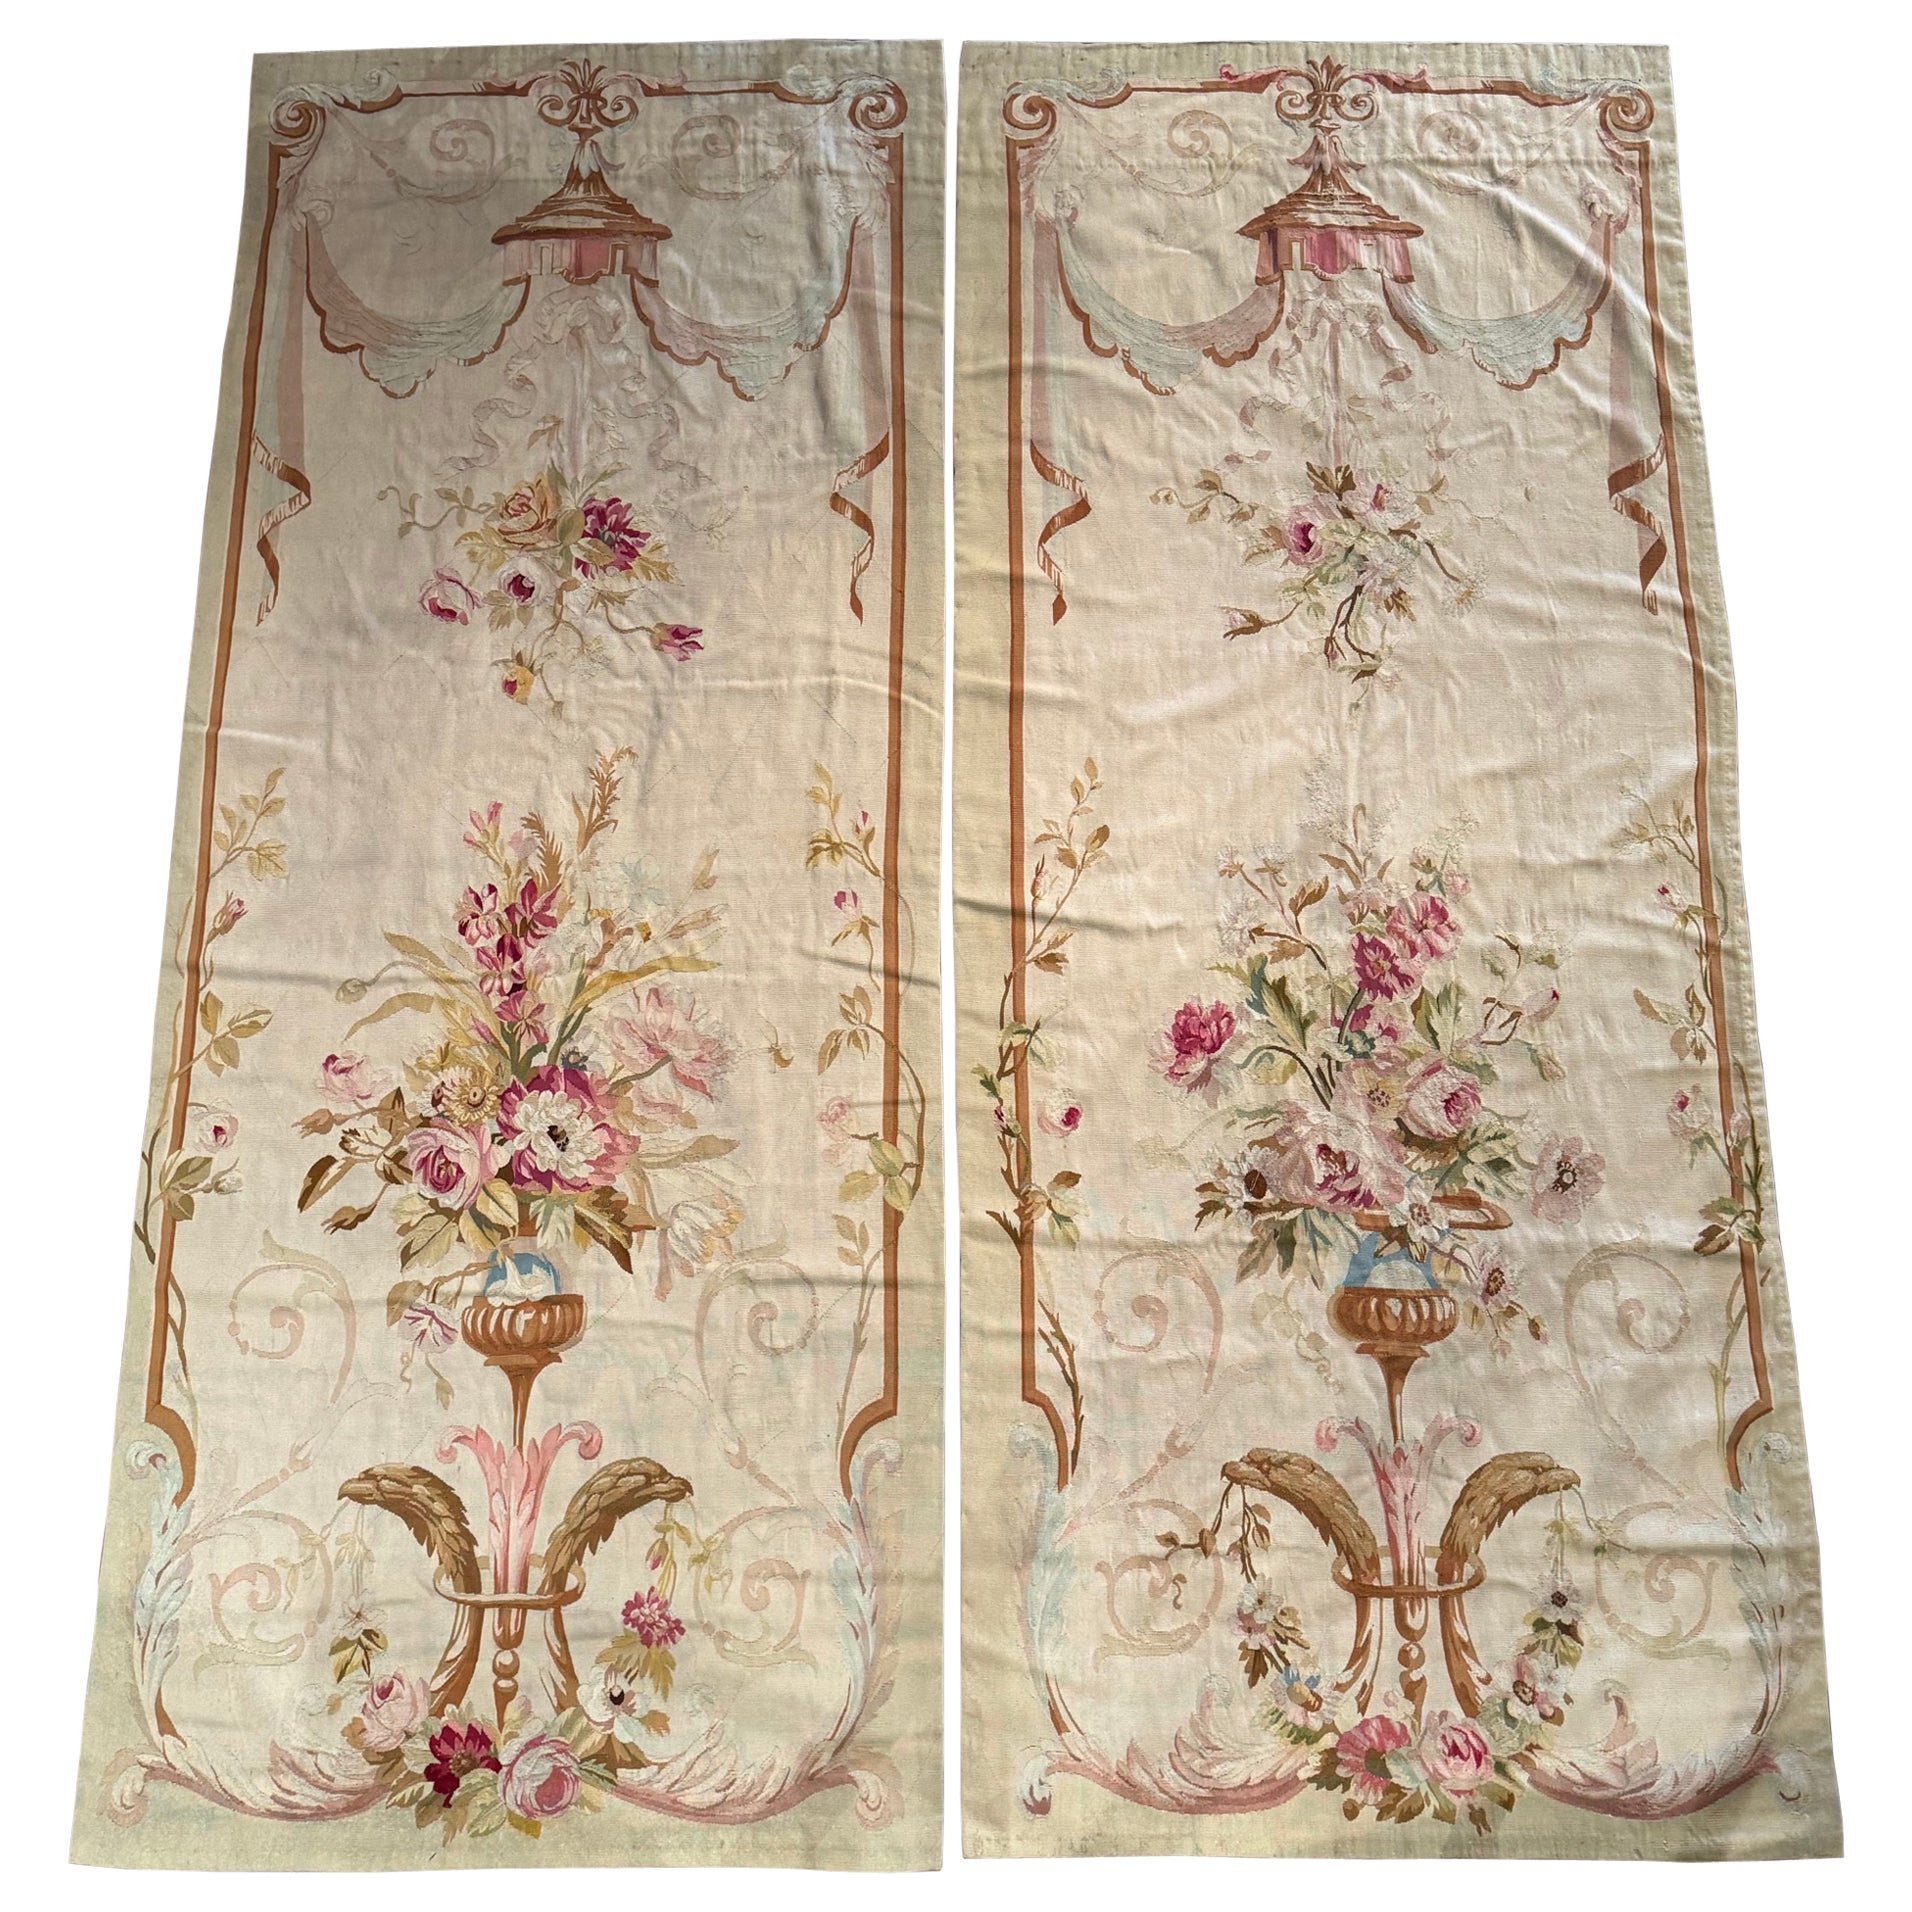 Pair of Mid-19th Century French Handwoven Floral Aubusson Wall Hanging Portieres For Sale